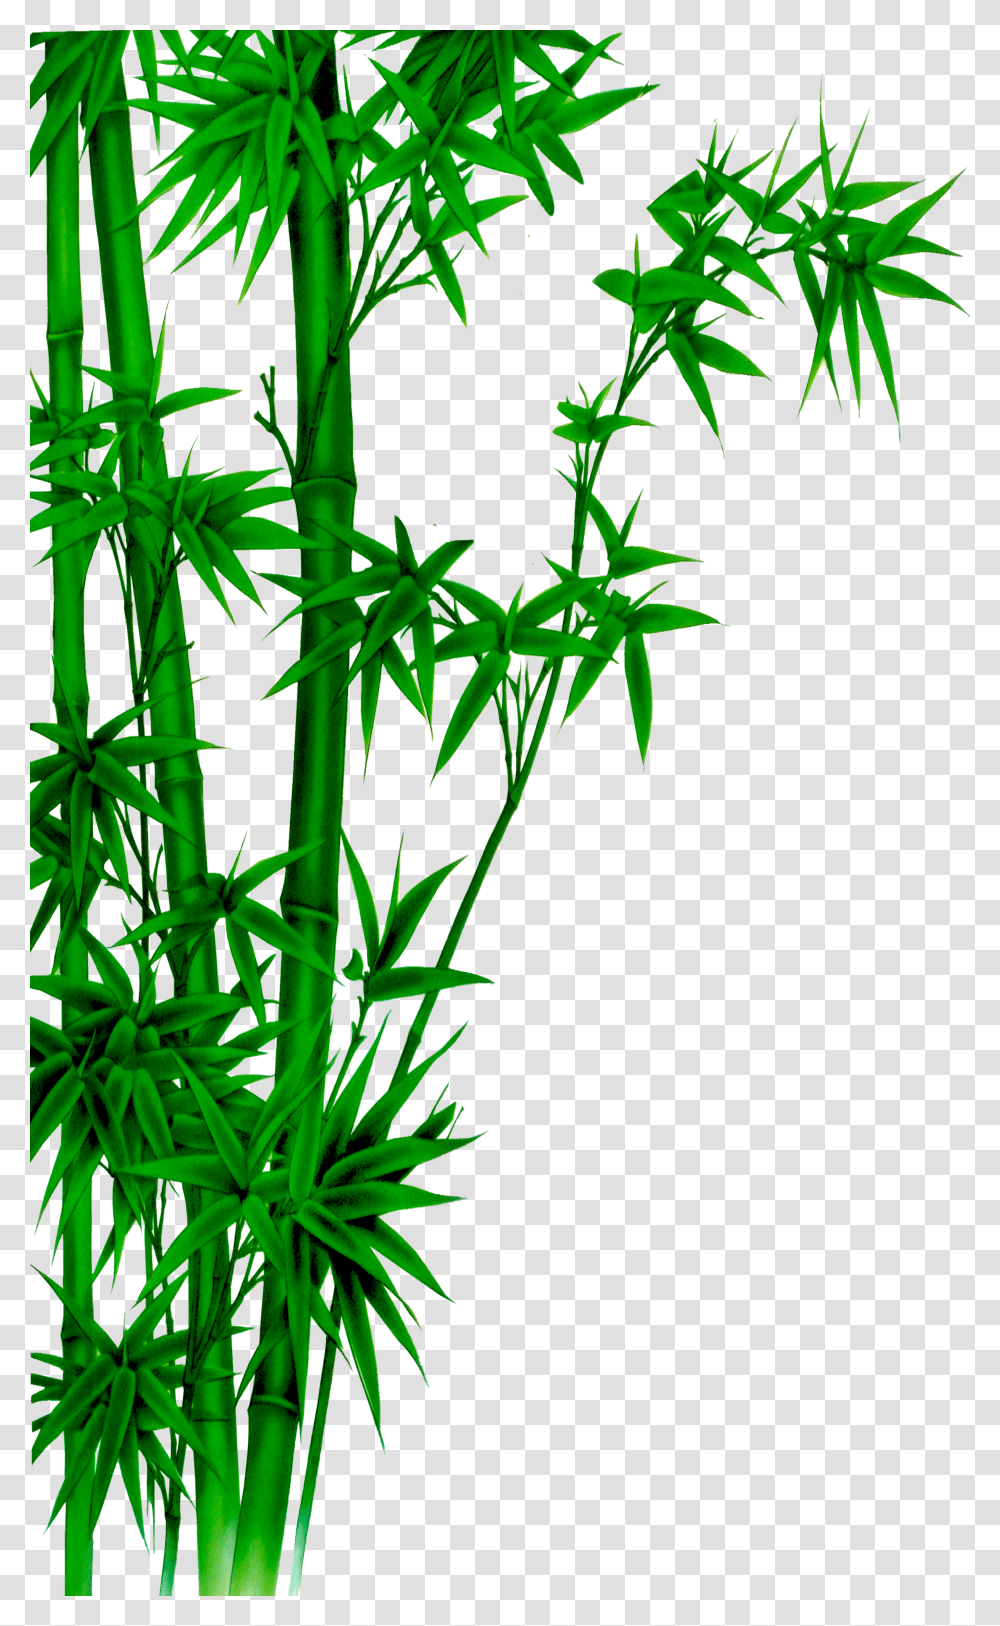 Poster Bamboo Wash Painting Ink Free Hq Image Clipart Bamboo Poster Transparent Png